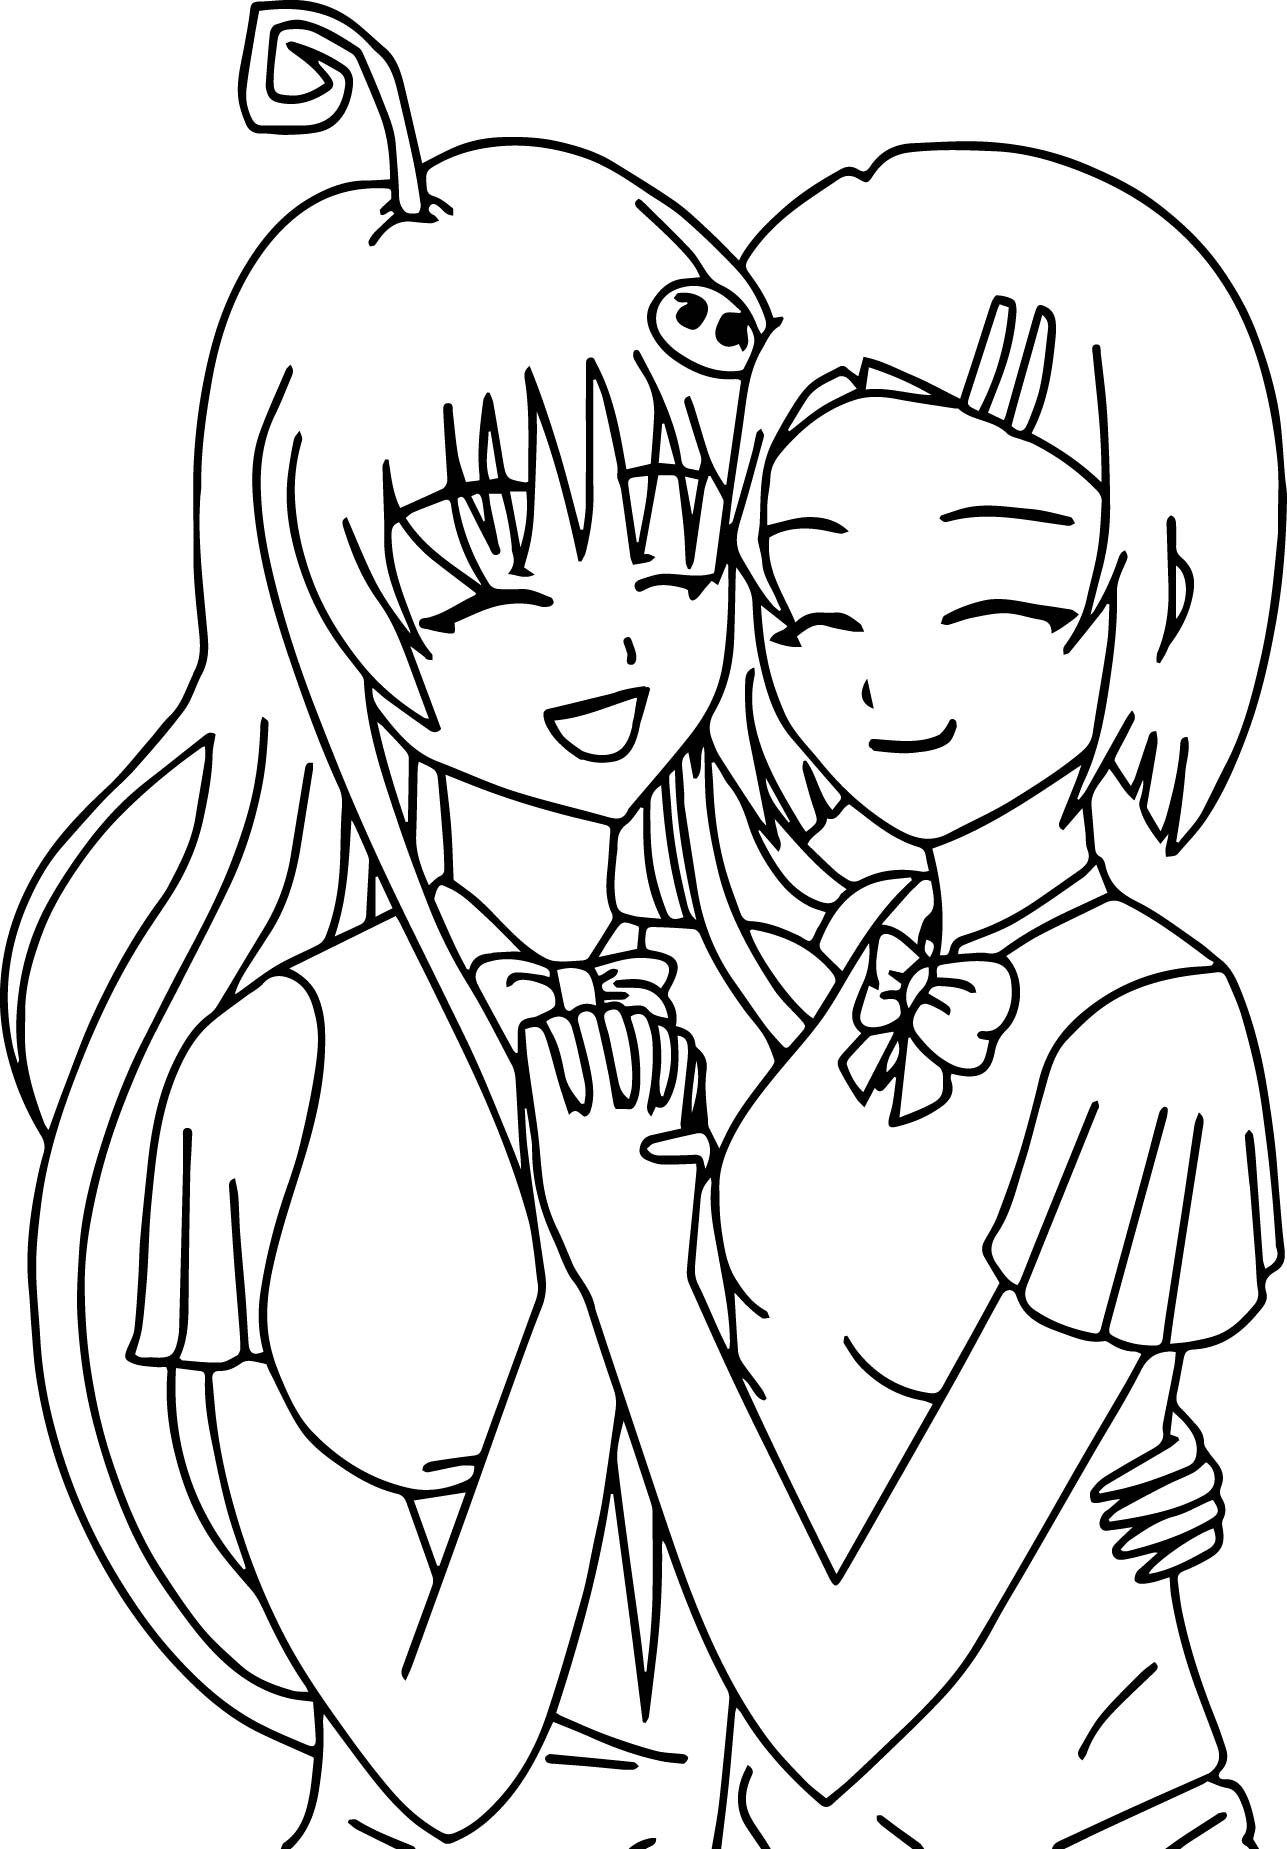 Best Friend Coloring Pages For Girls
 Best Friends Printable Coloring Pages